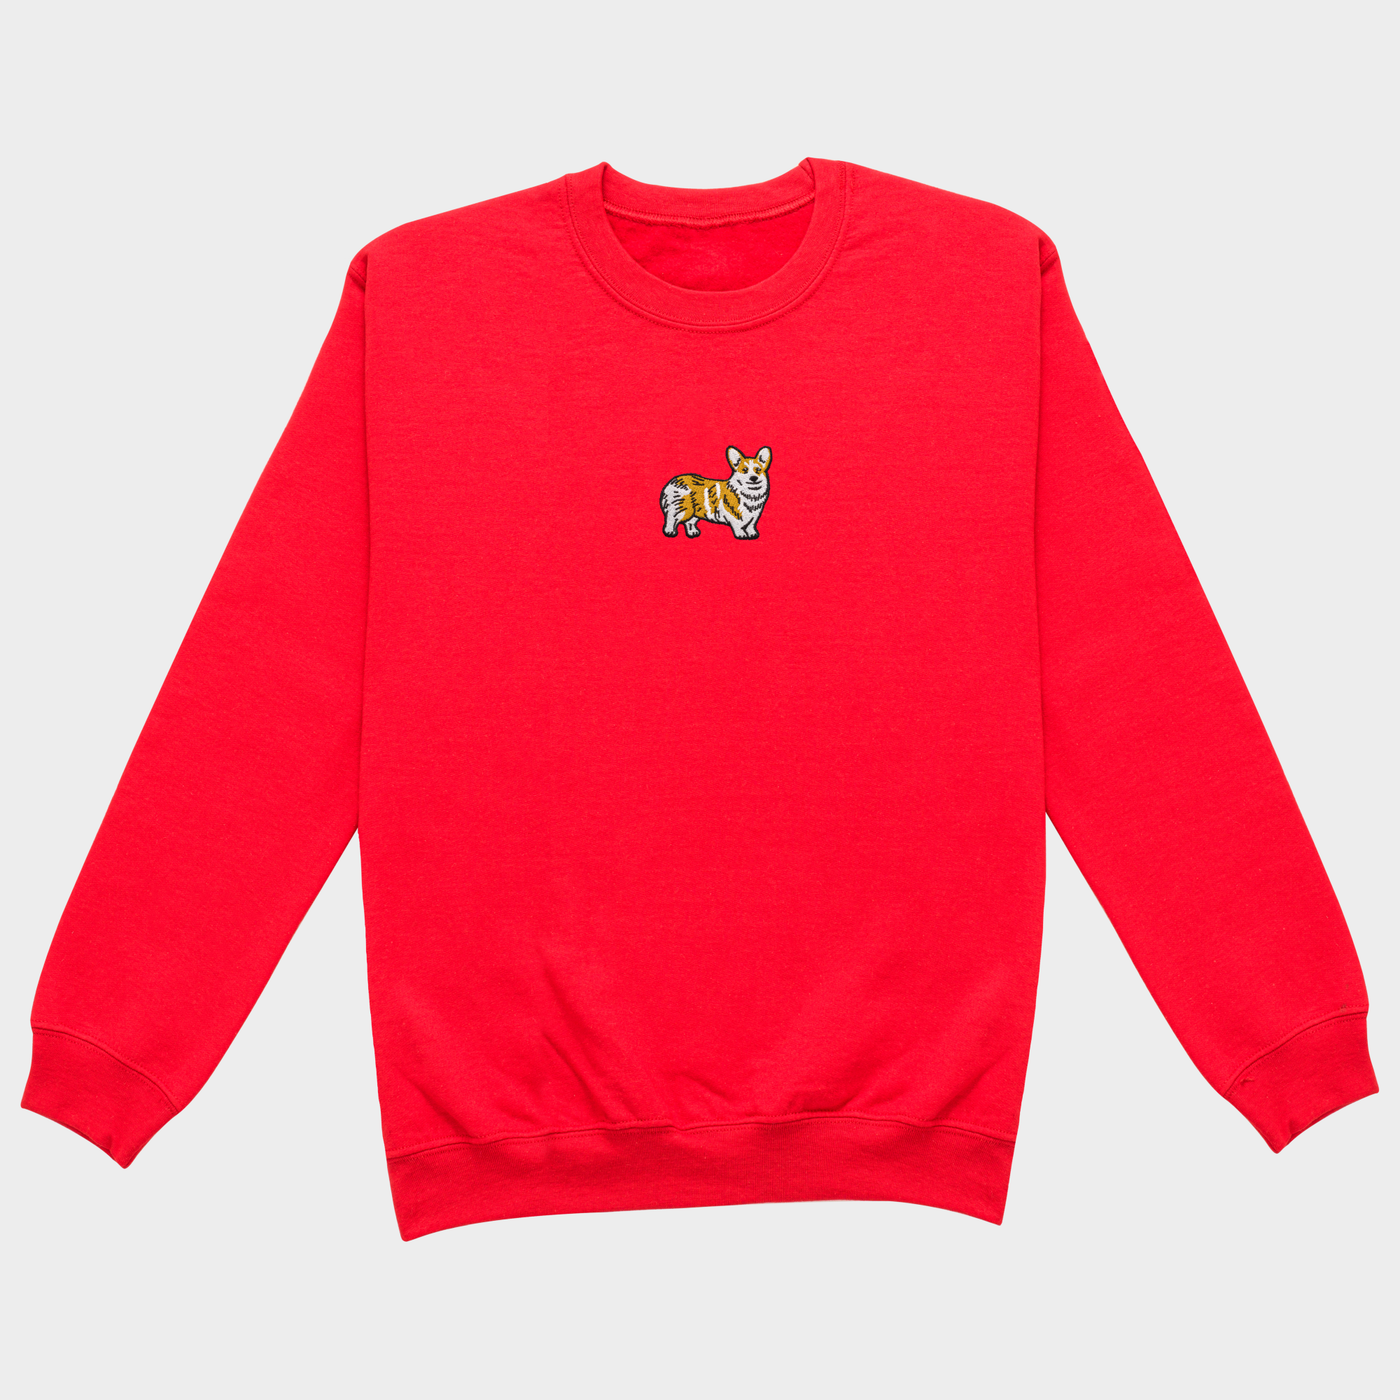 Bobby's Planet Women's Embroidered Corgi Sweatshirt from Paws Dog Cat Animals Collection in Red Color#color_red